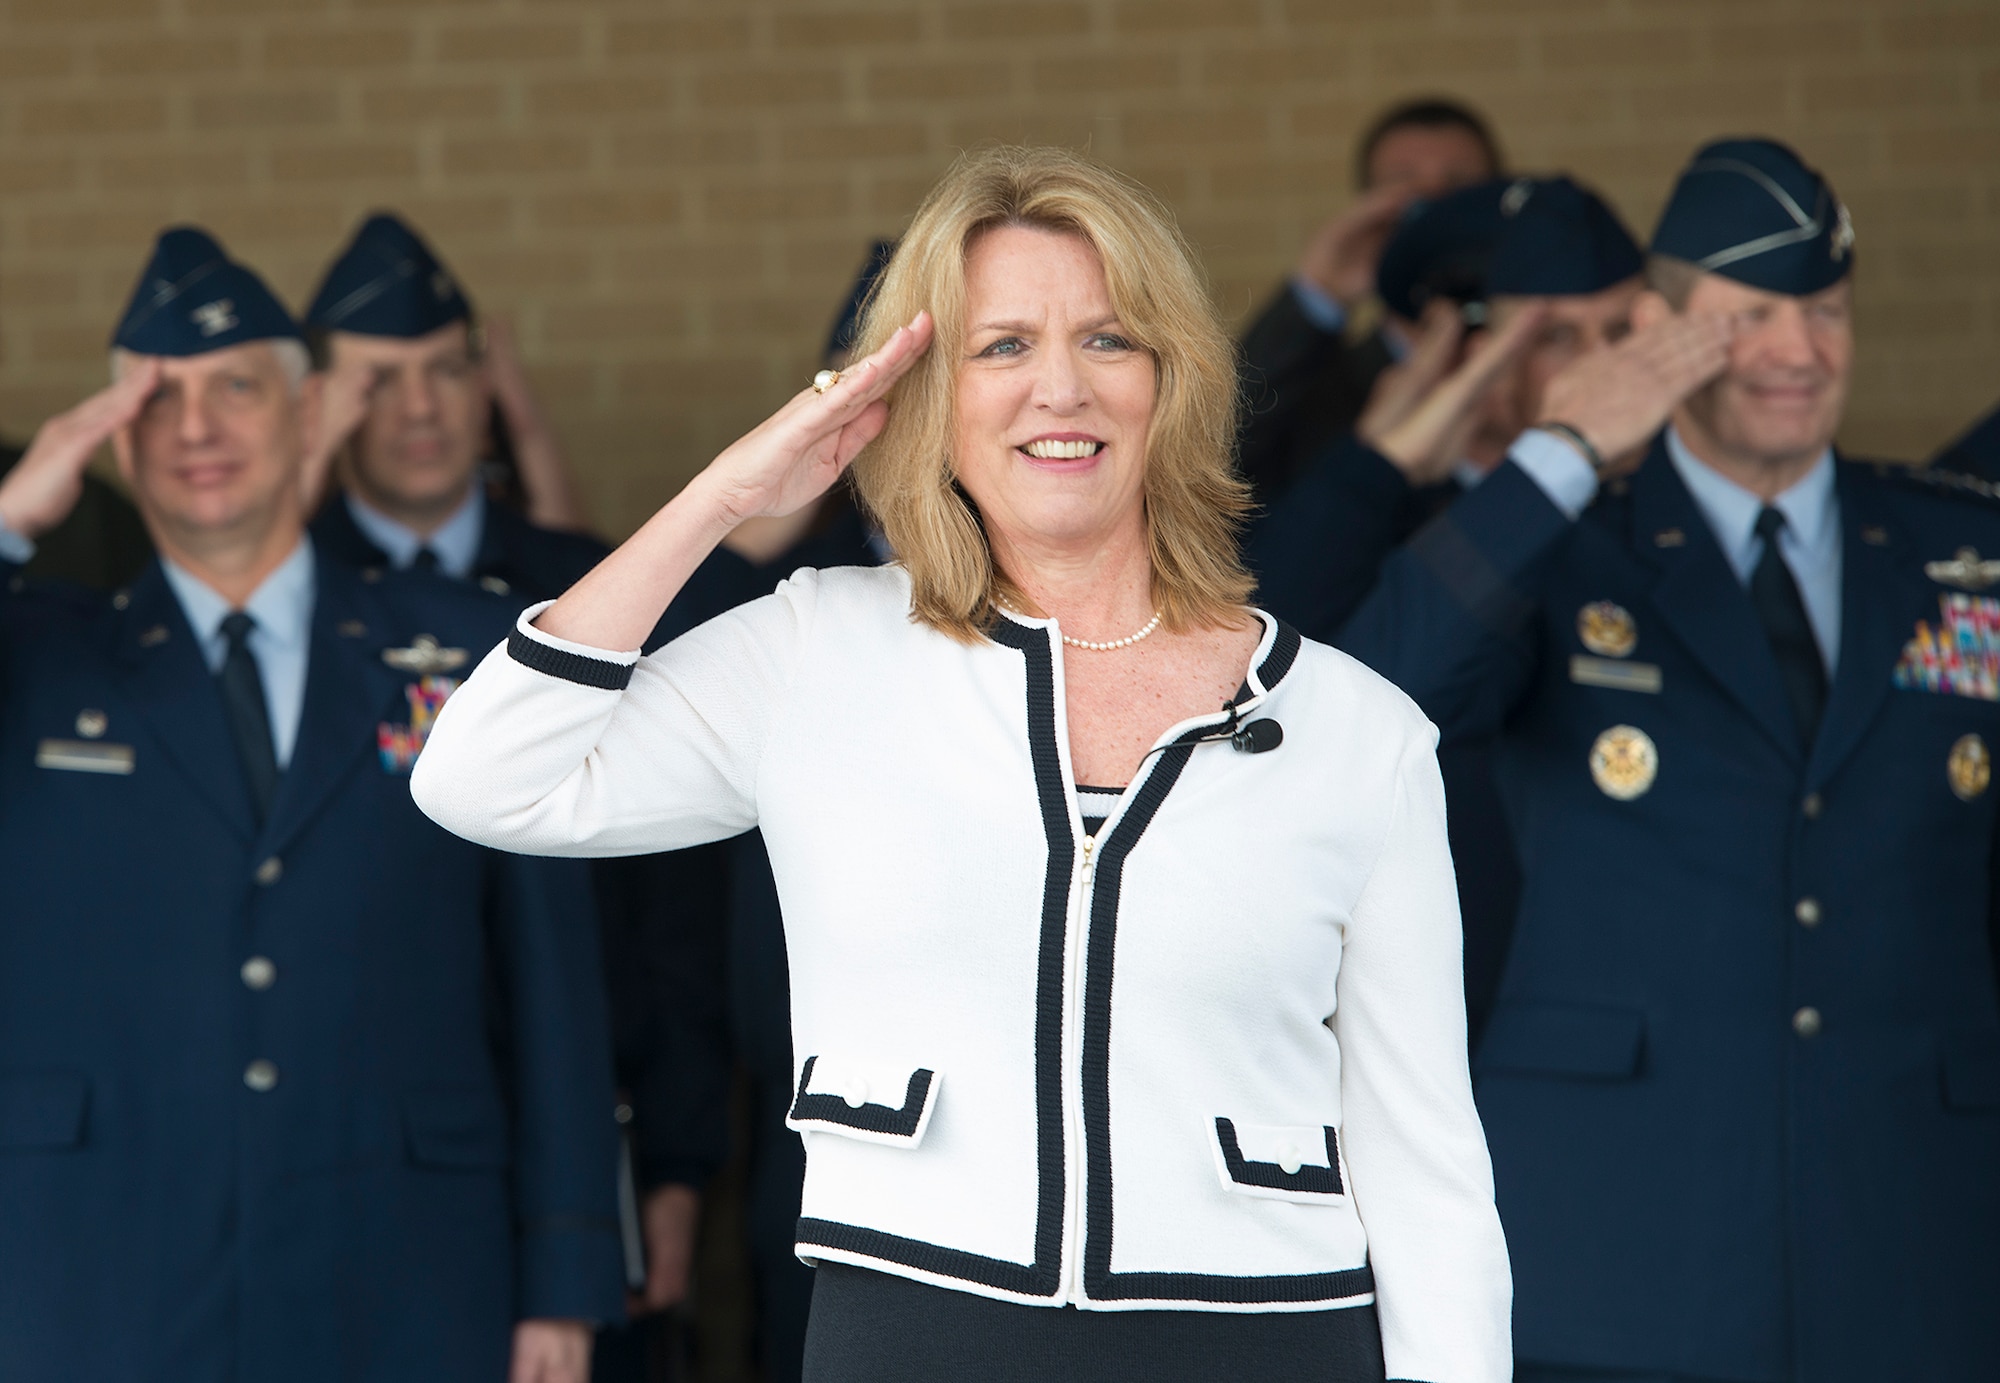 The Honorable Deborah L. James, Secretary of the Air Force, renders a salute during pass and review at the basic military training graduation January 31, 2014, at Joint Base San Antonio-Lackland. During her visit, James toured dormitory facilities and visited with officials at the 24th Air Force Headquarters before concluding her one-day visit with an Air Education and Training Command all call. (U.S. Air Force photo/Benjamin Faske)